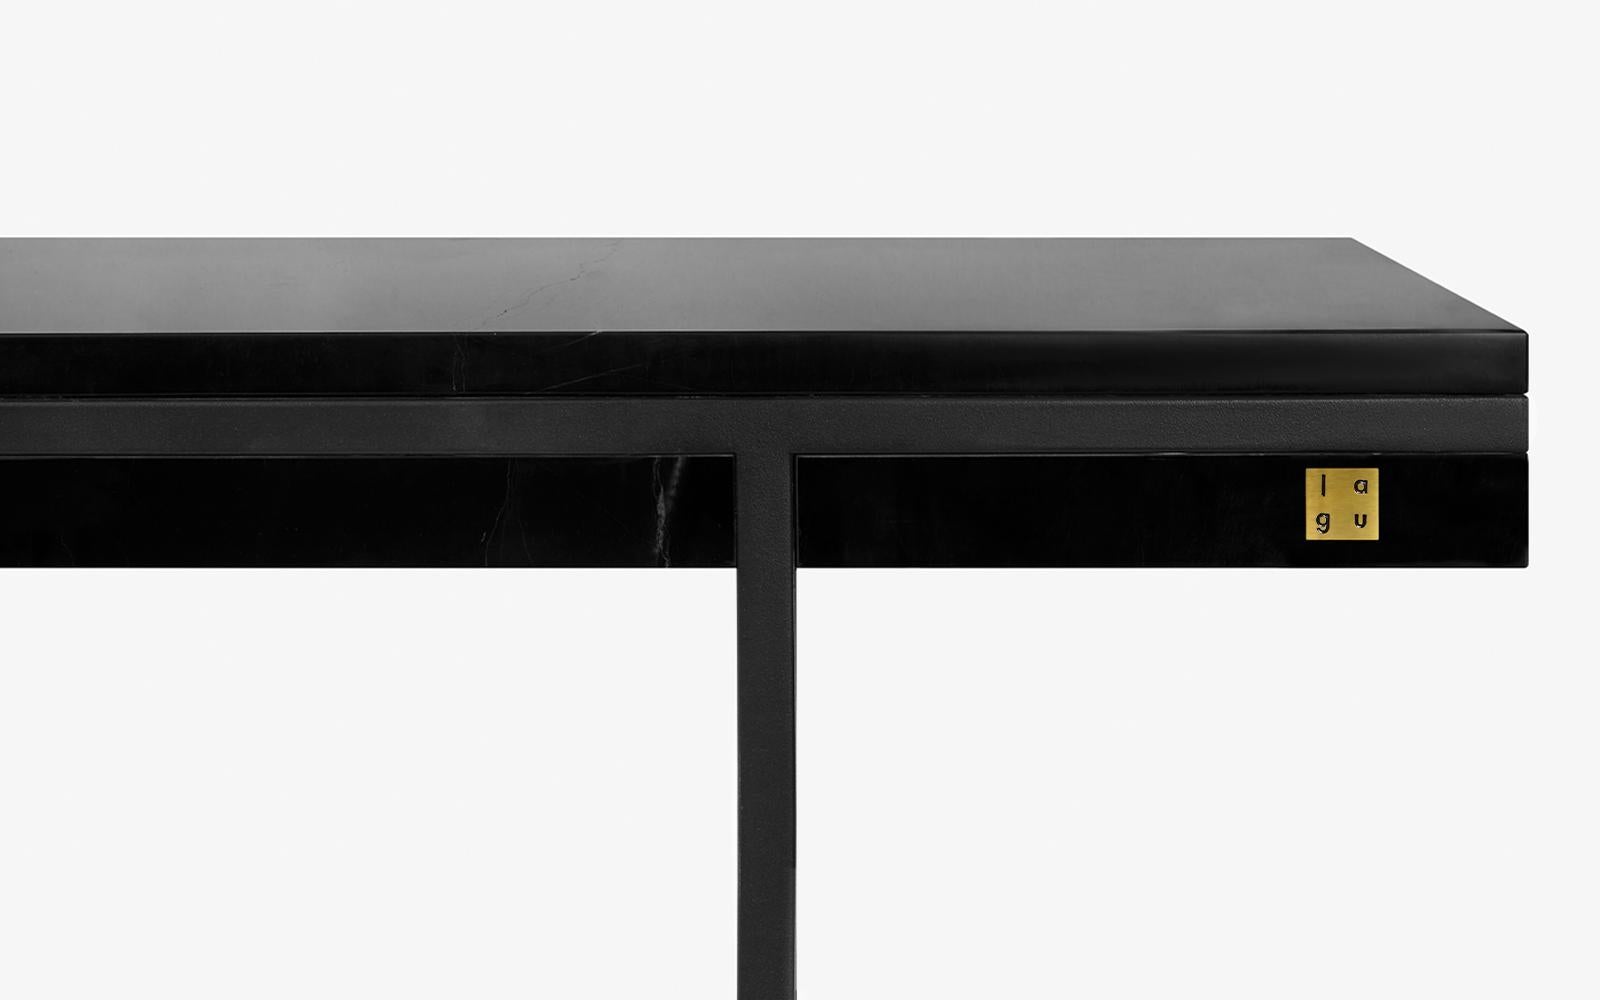 The Hidden sideboard is encased in Black marble highlighted with metal accents, incorporating a simple design.

Materials:
-Alexander black marble
-Black painted metal
-Registered design

Alternatives:
-Light walnut / natural flaxseed oil /